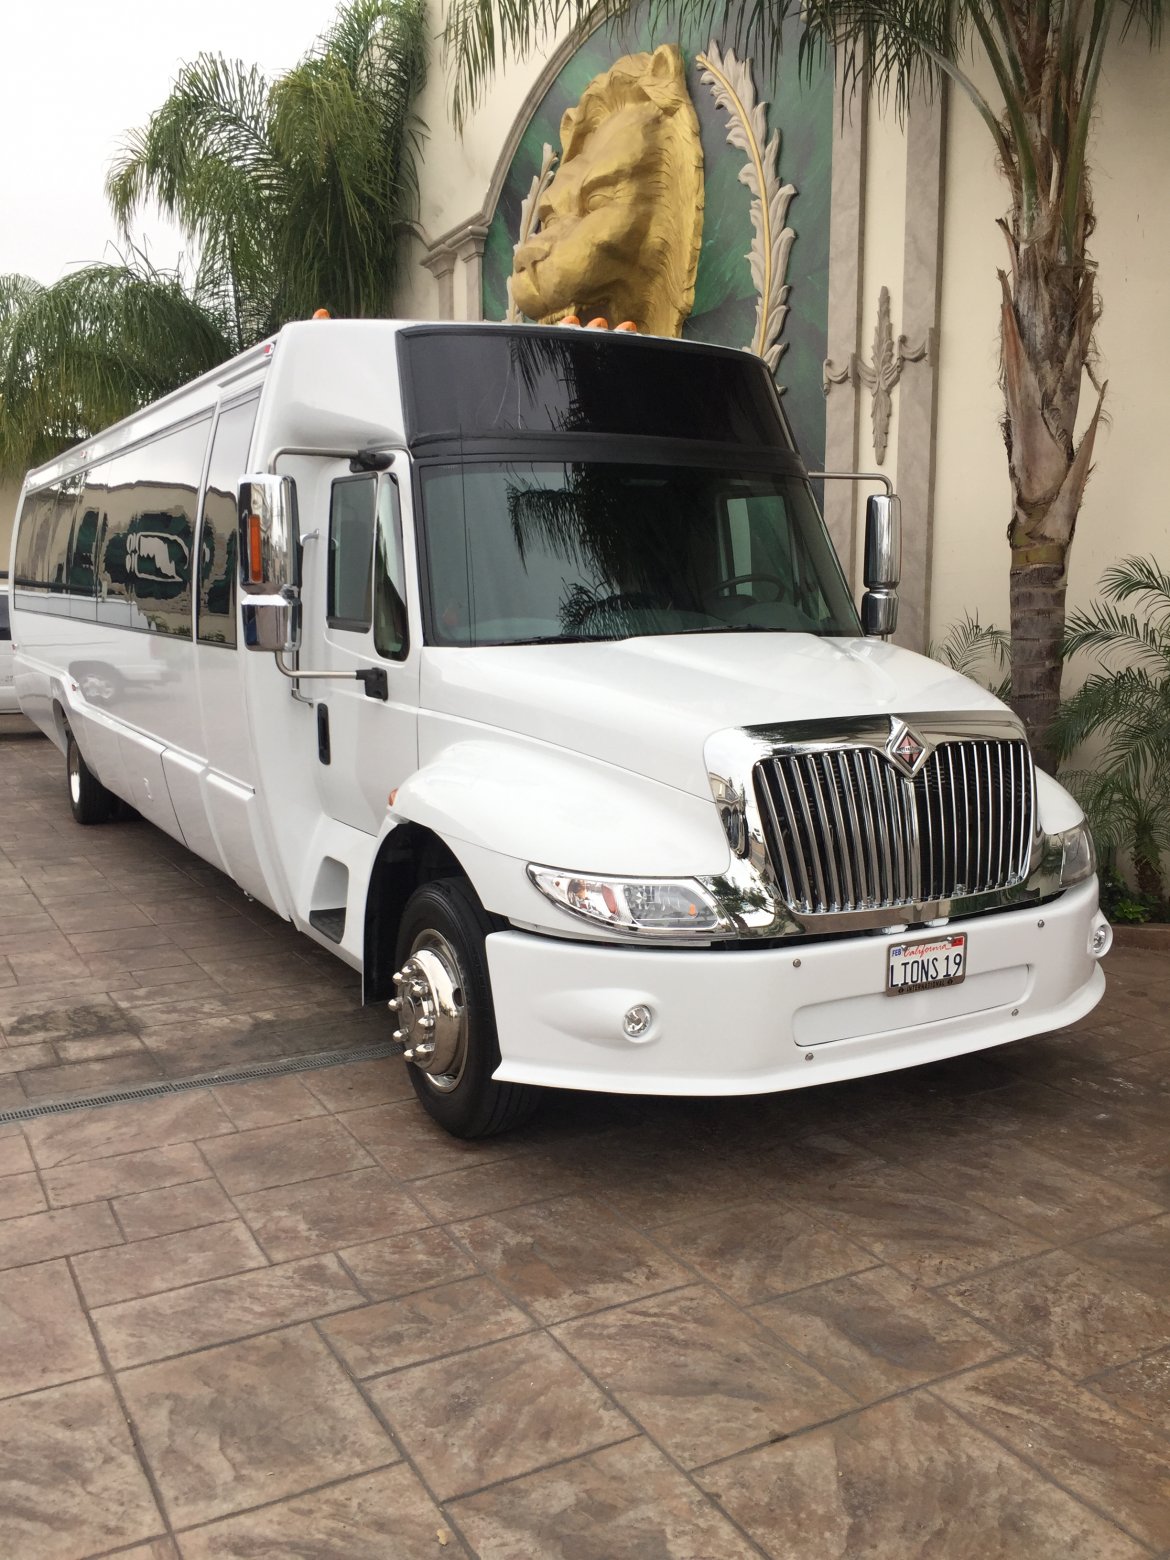 Limo Bus for sale: 2006 International 3200 by LIMOS BY MOONLIGHT